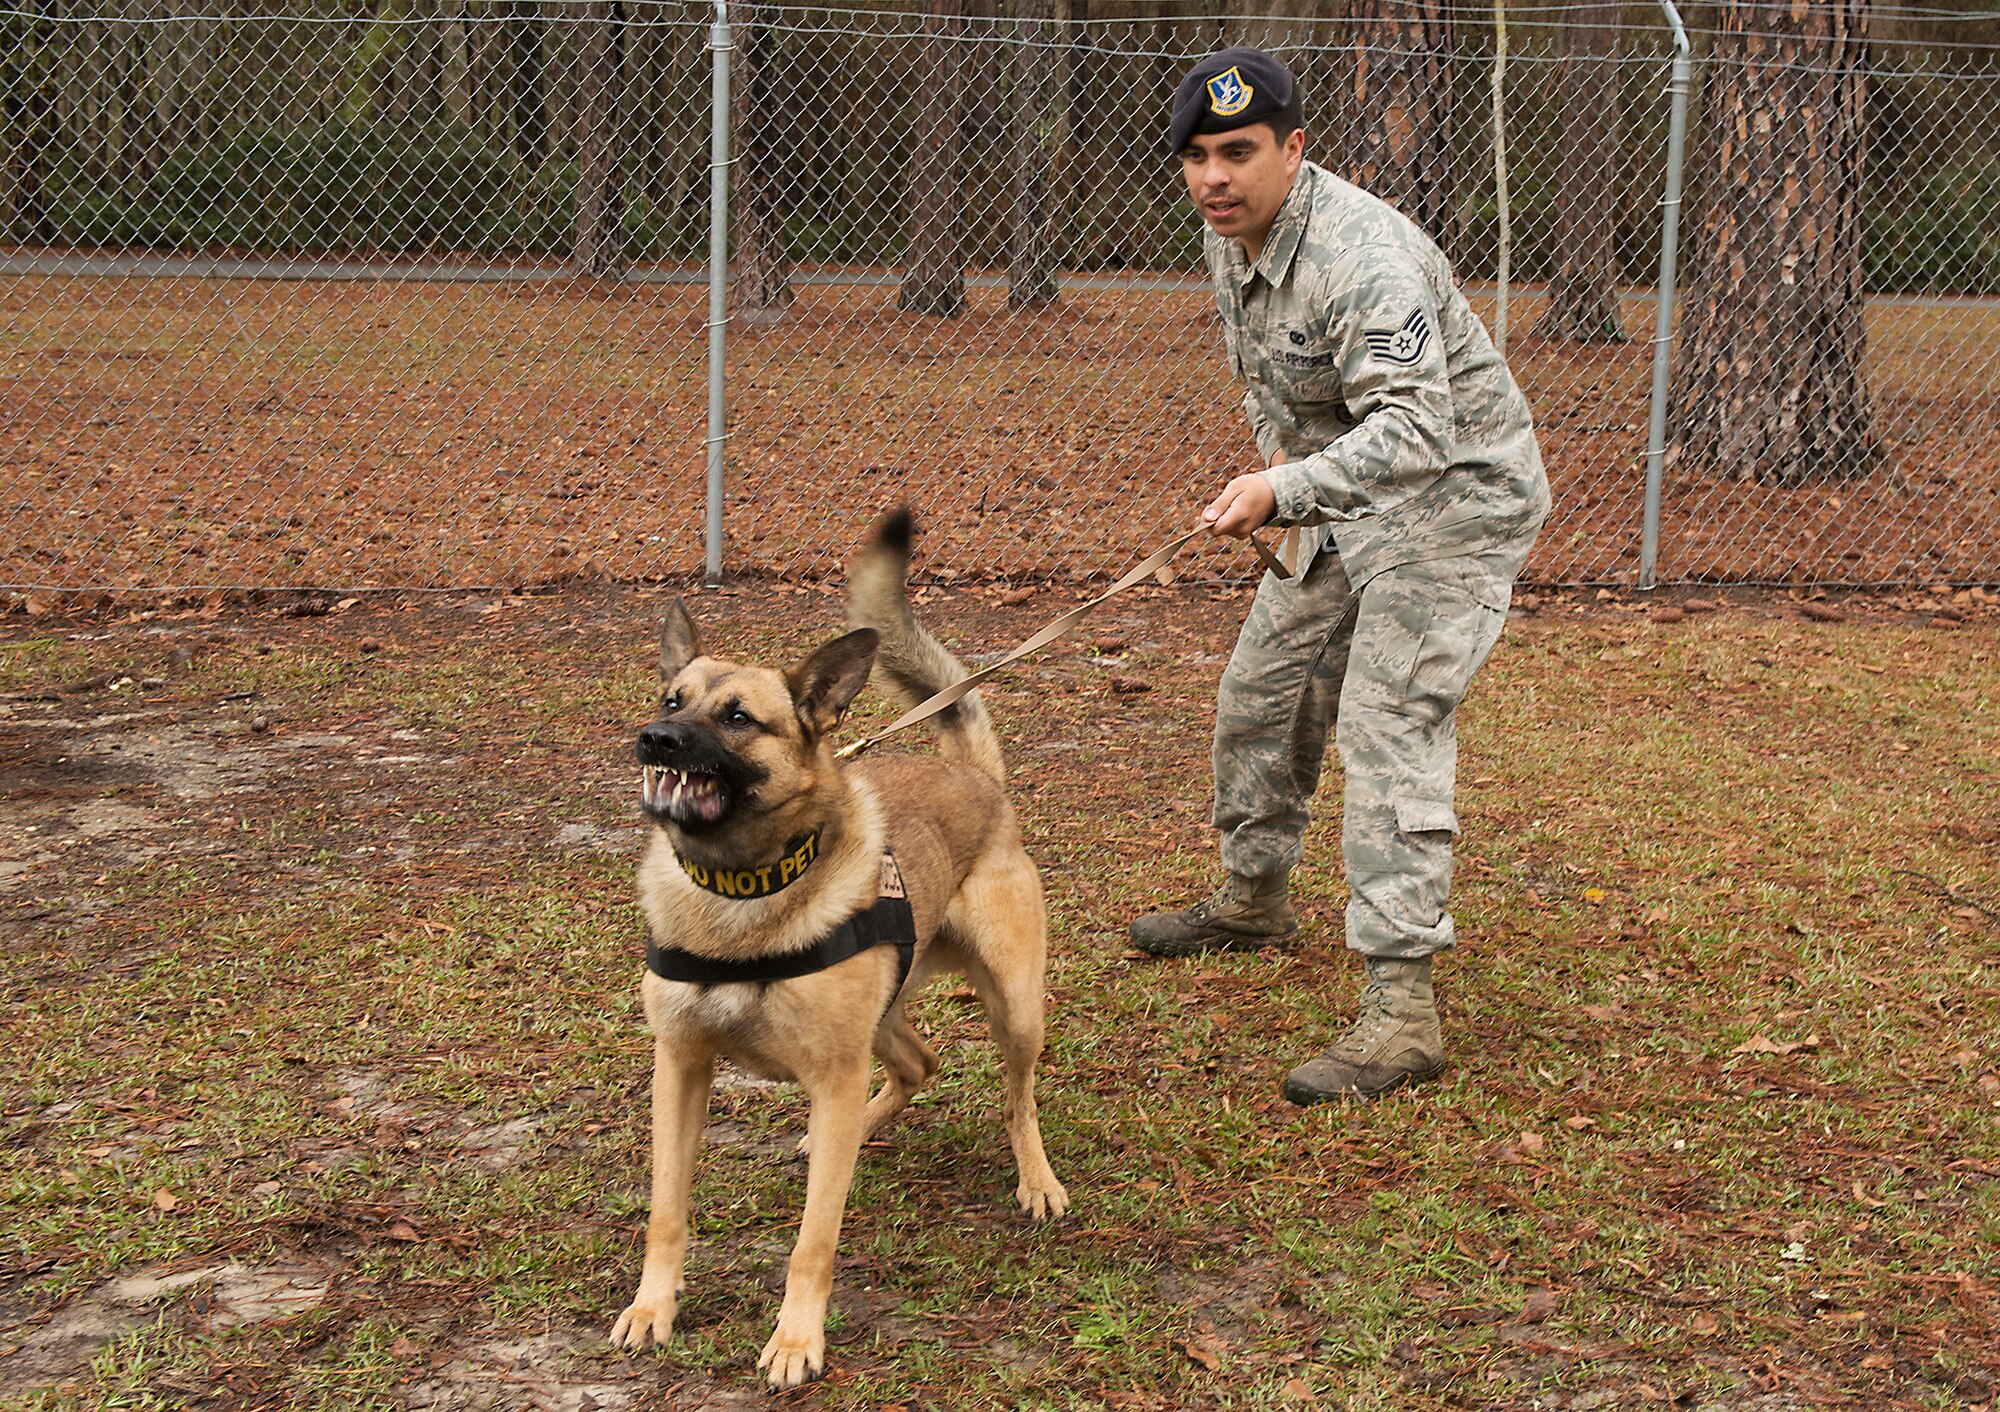 U.S. Air Force Staff Sgt. Devin Tiger, 23d Security Forces Squadron Military Working Dog handler, holds back MWD Nido as he growls at an aggressor during training at Moody Air Force Base, Ga., March 7, 2014. MWDs Nido and Marco arrived from the puppy program at Lackland AFB, Texas December 2013. (U.S. Air Force photo by Senior Airman Tiffany M. Grigg/Released) 